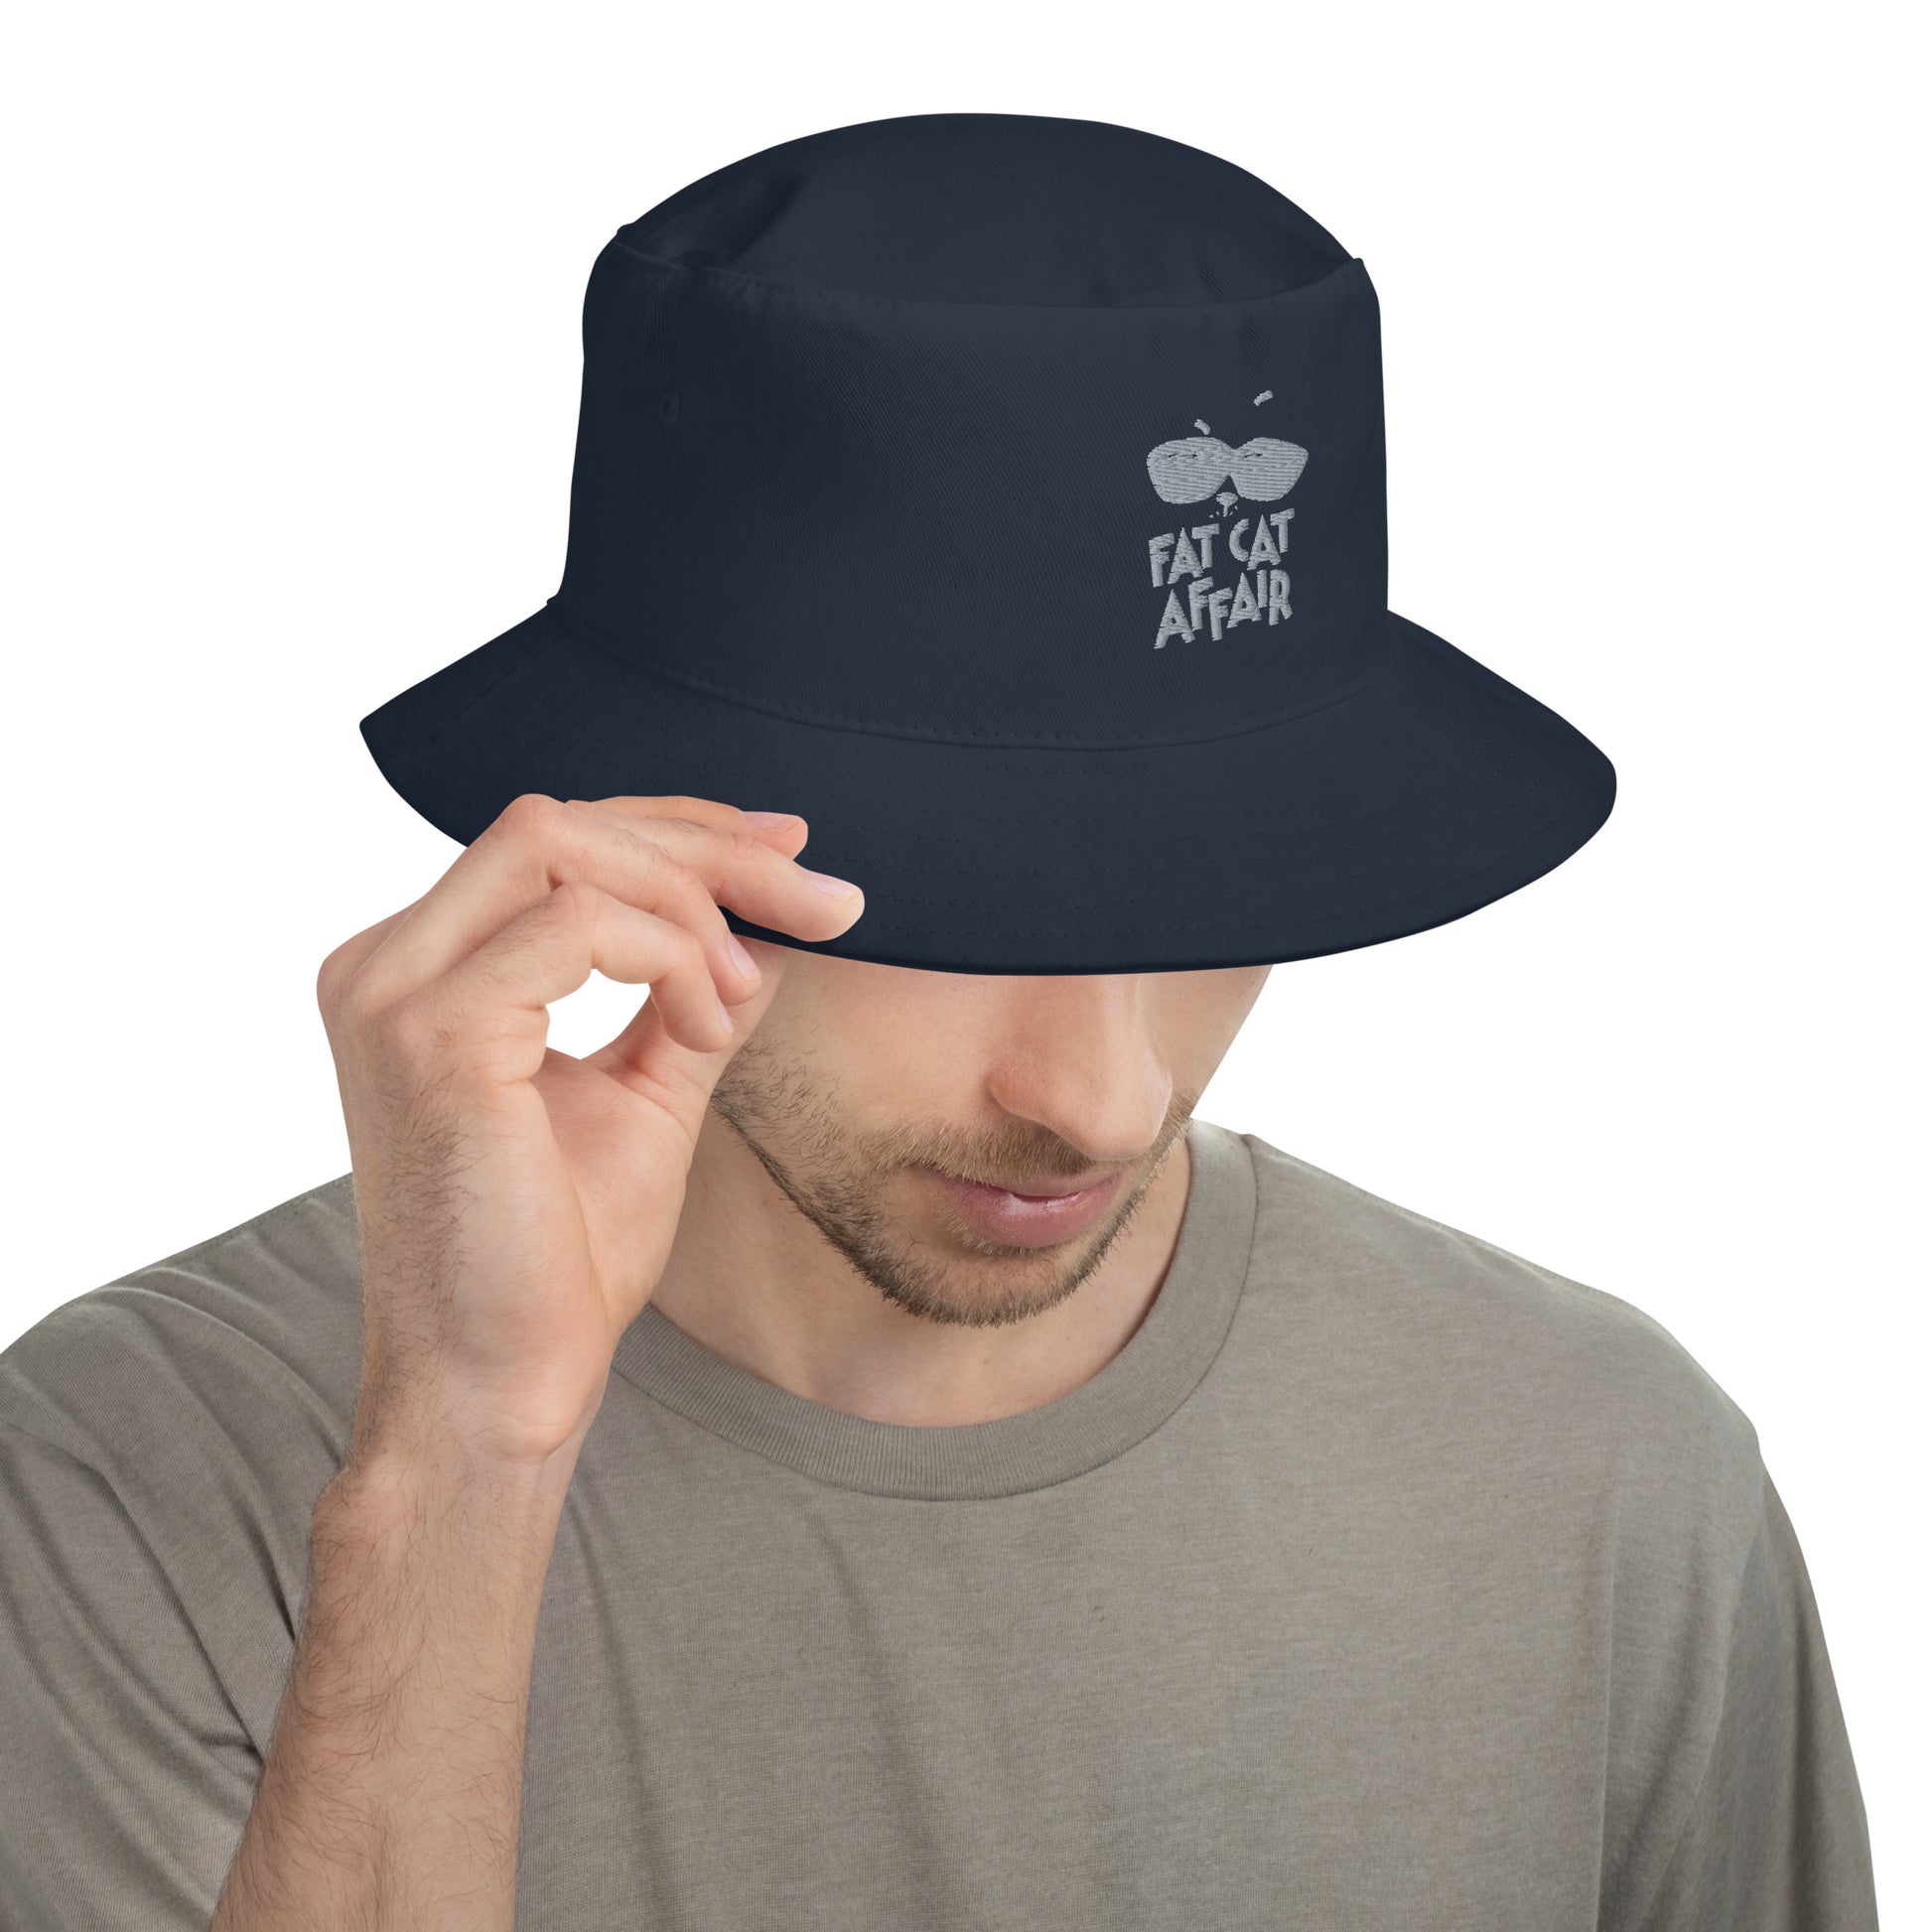 Men's navy hat with embroidery.